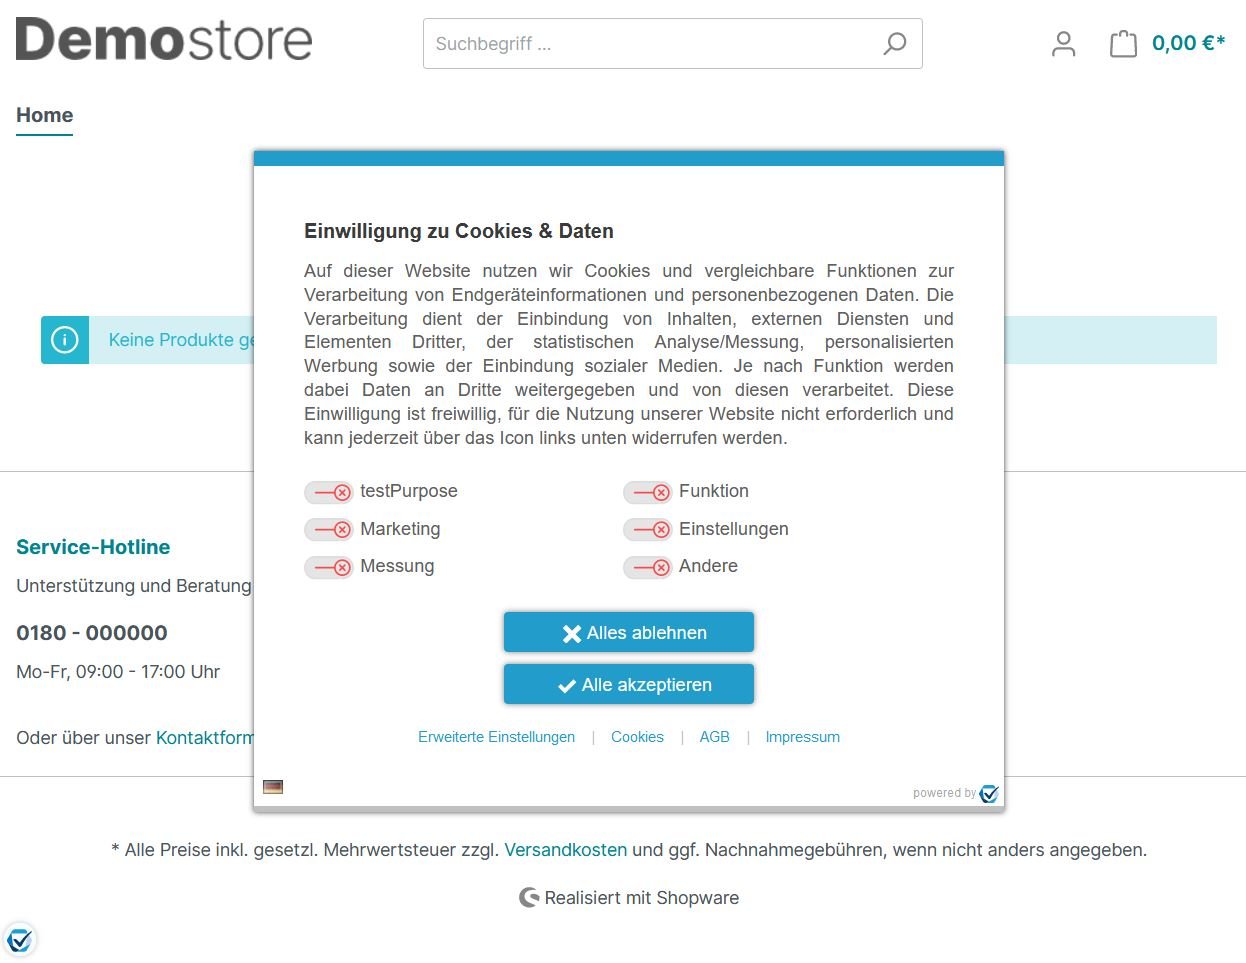 consentmanager | DSGVO Cookie Lösung | Consent Management Provider